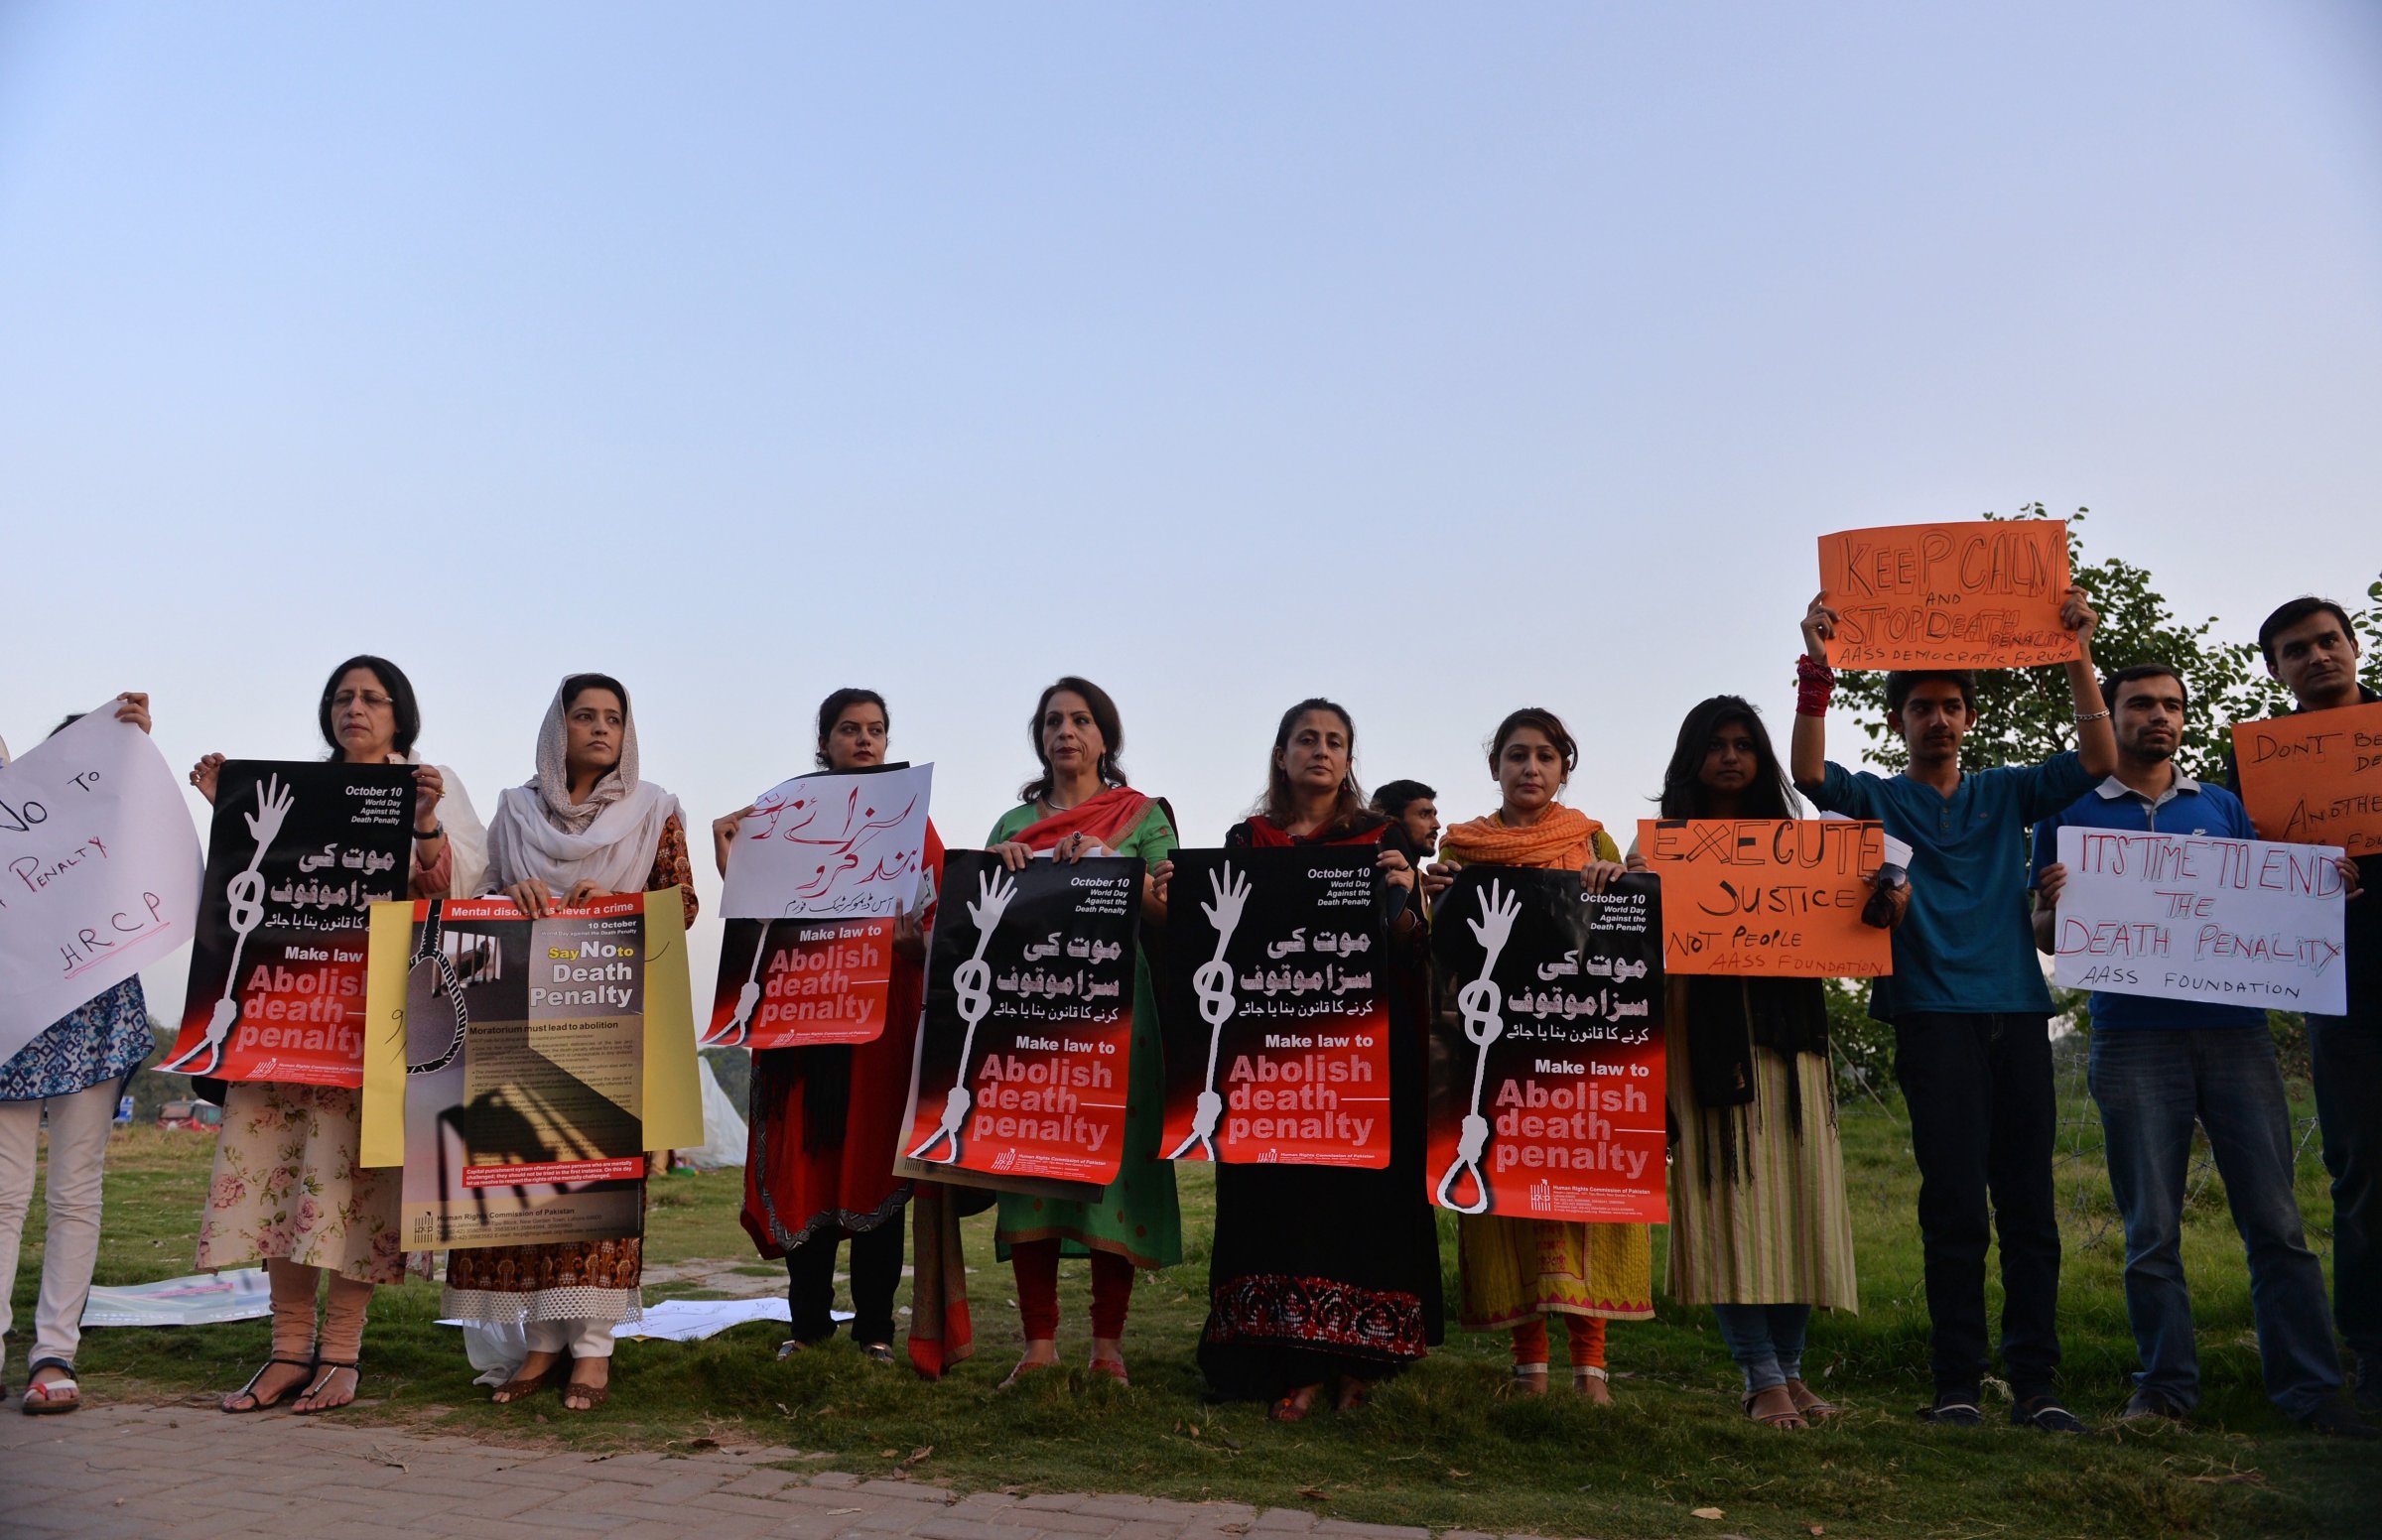 Pakistani NGO activists protest the death penalty in Islamabad on October 10, 2014